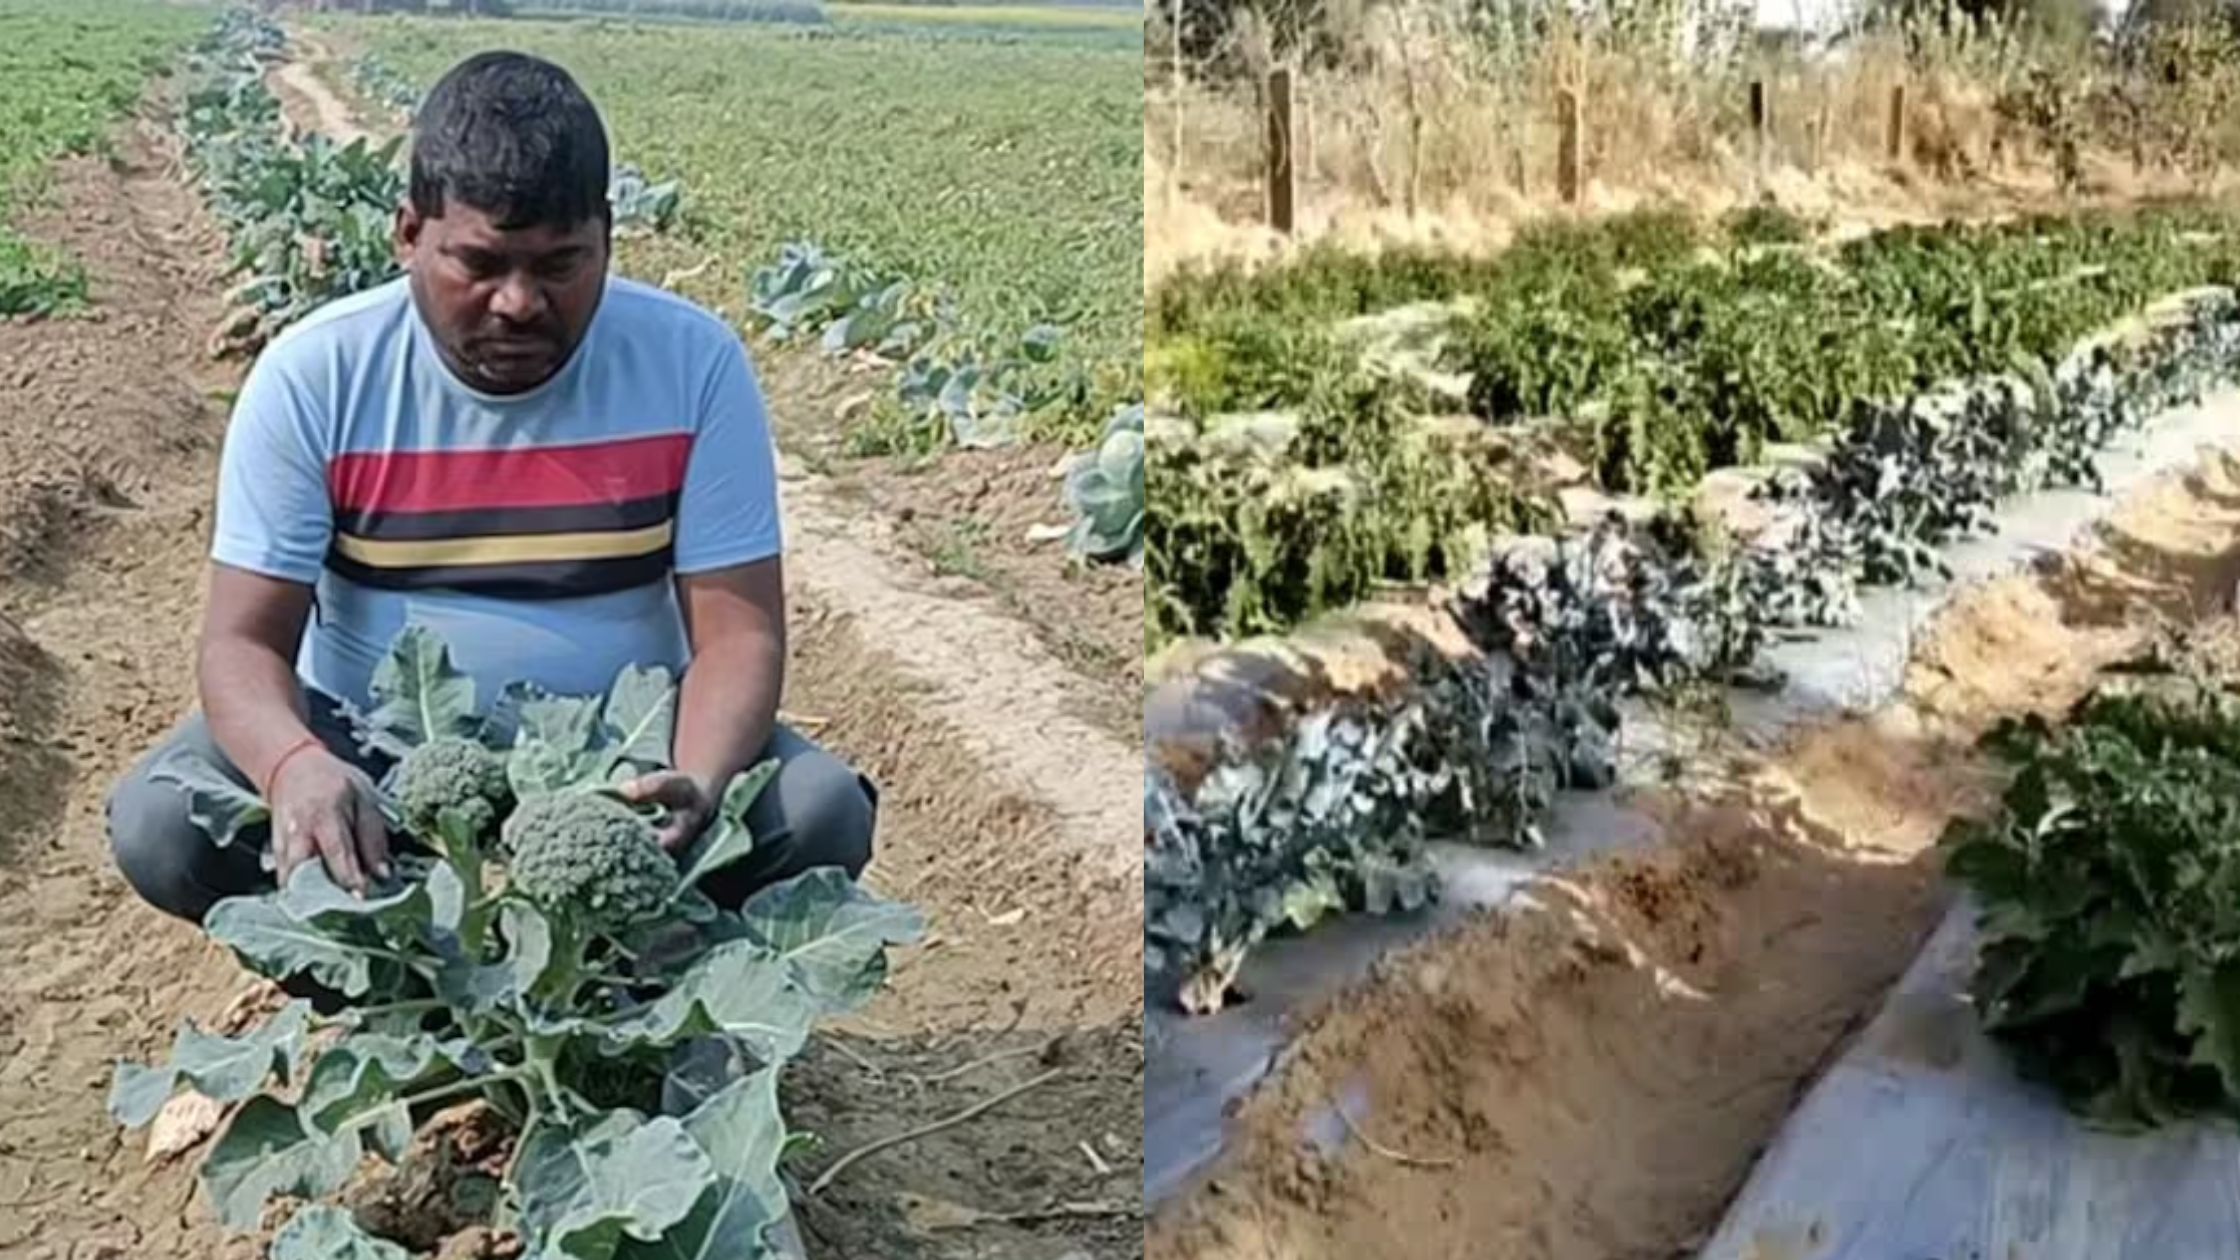 The farmer quit his job and started cultivating broccoli